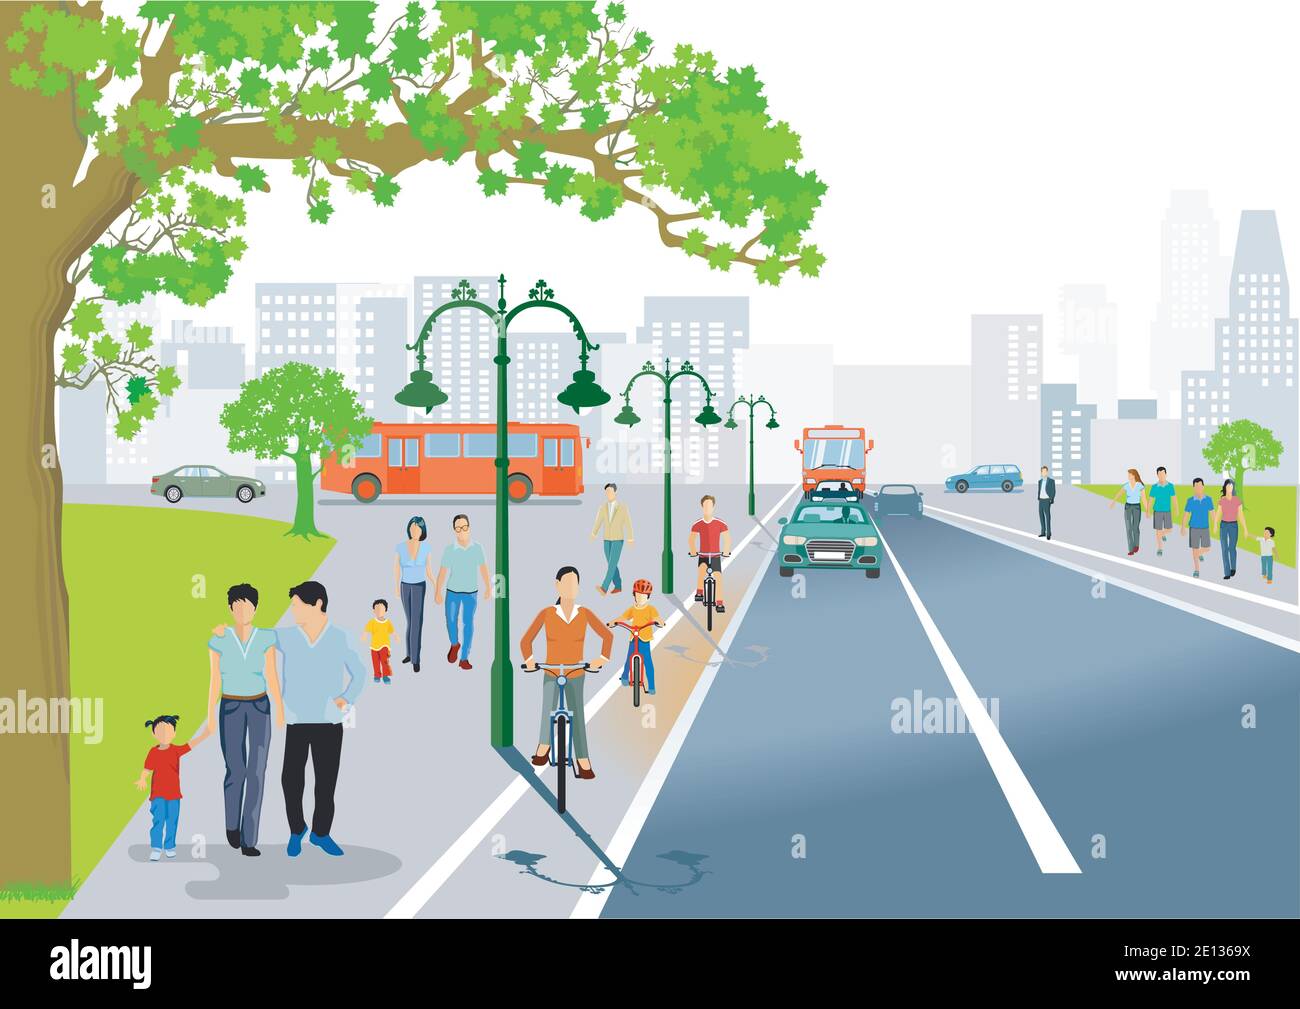 City with people and road traffic, illustration Stock Vector